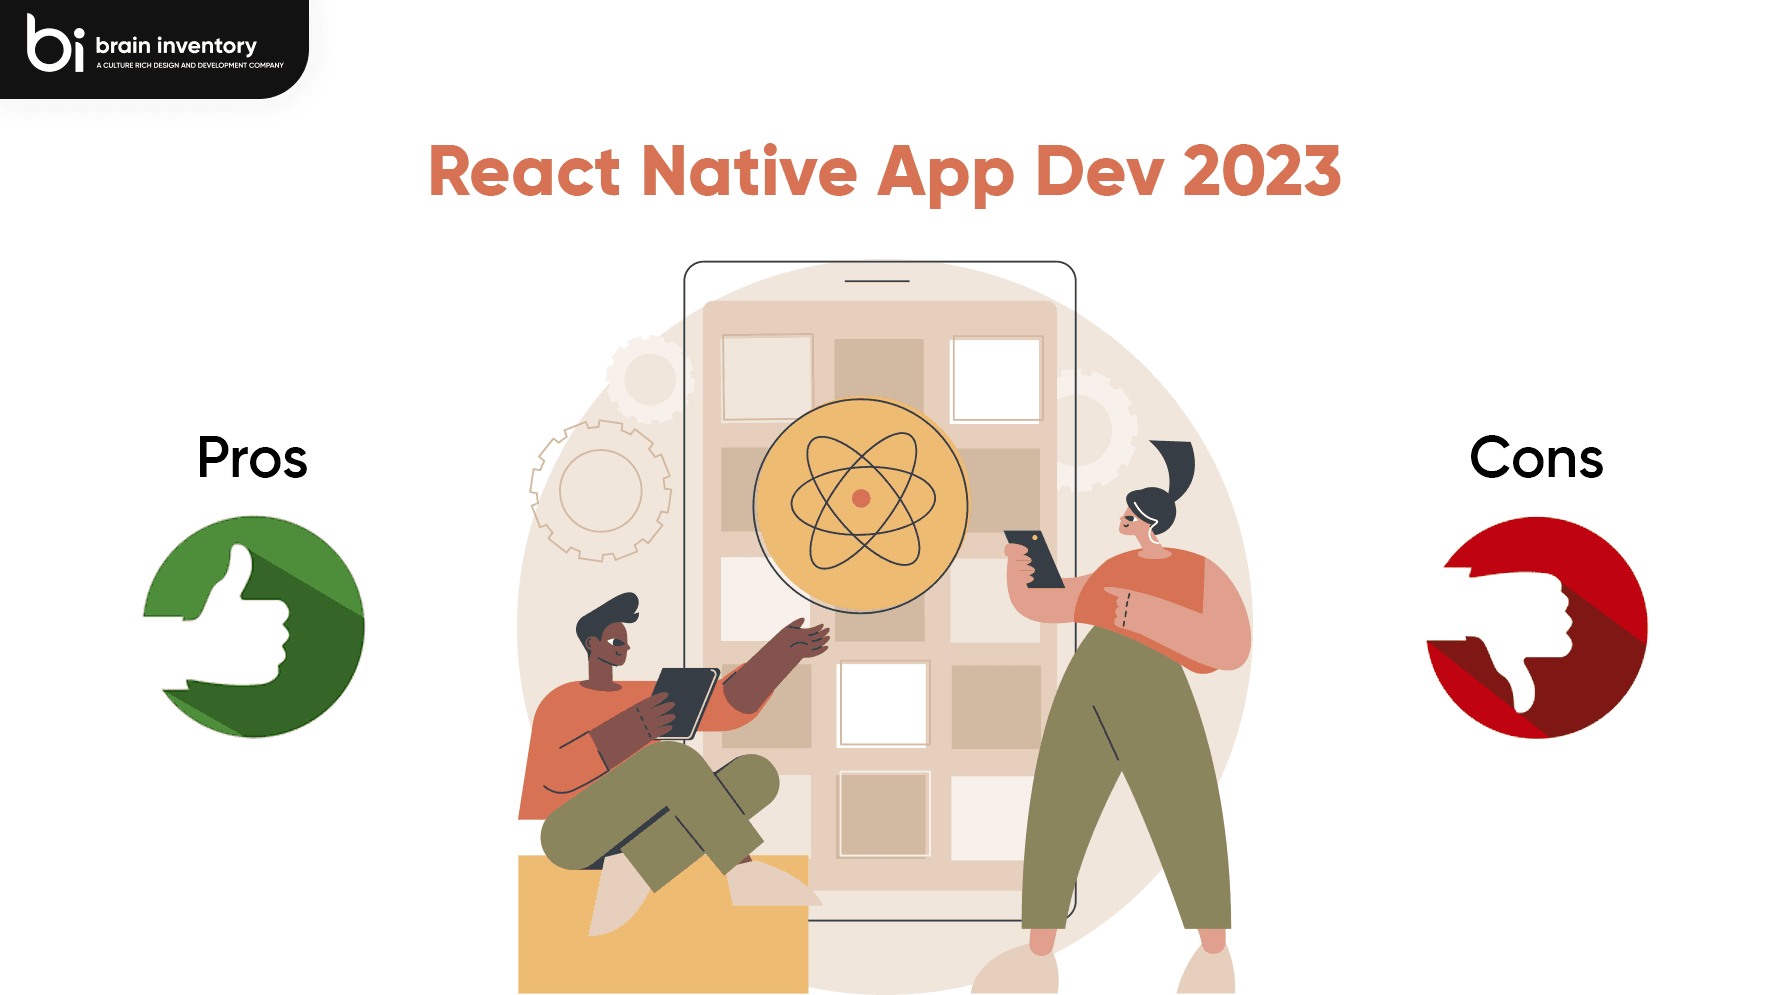 React Native App Dev: 2023 Pros and Cons